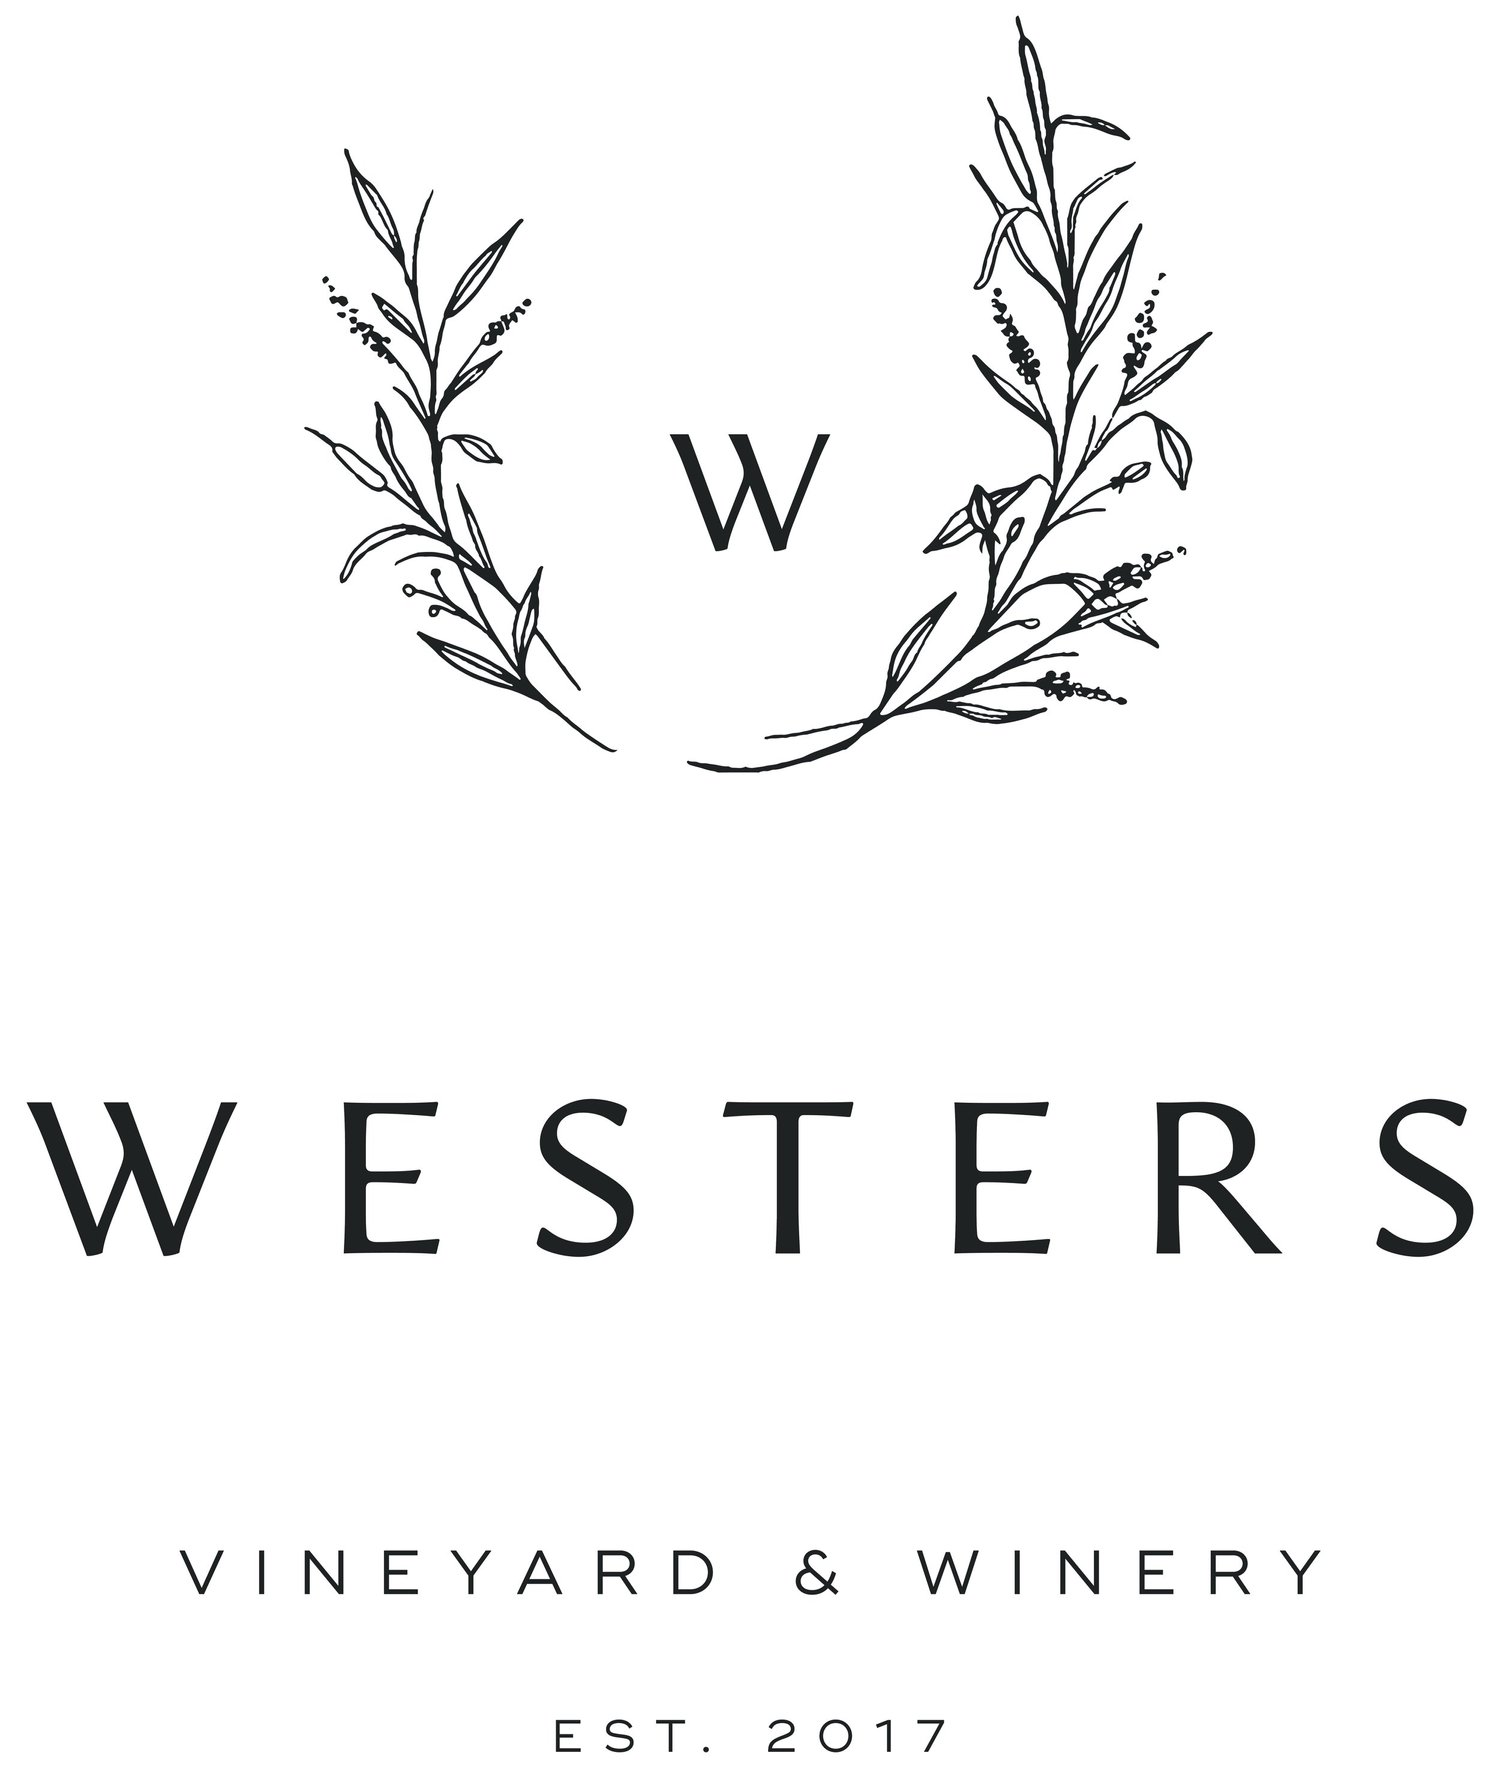 Westers Family Vineyard & Winery